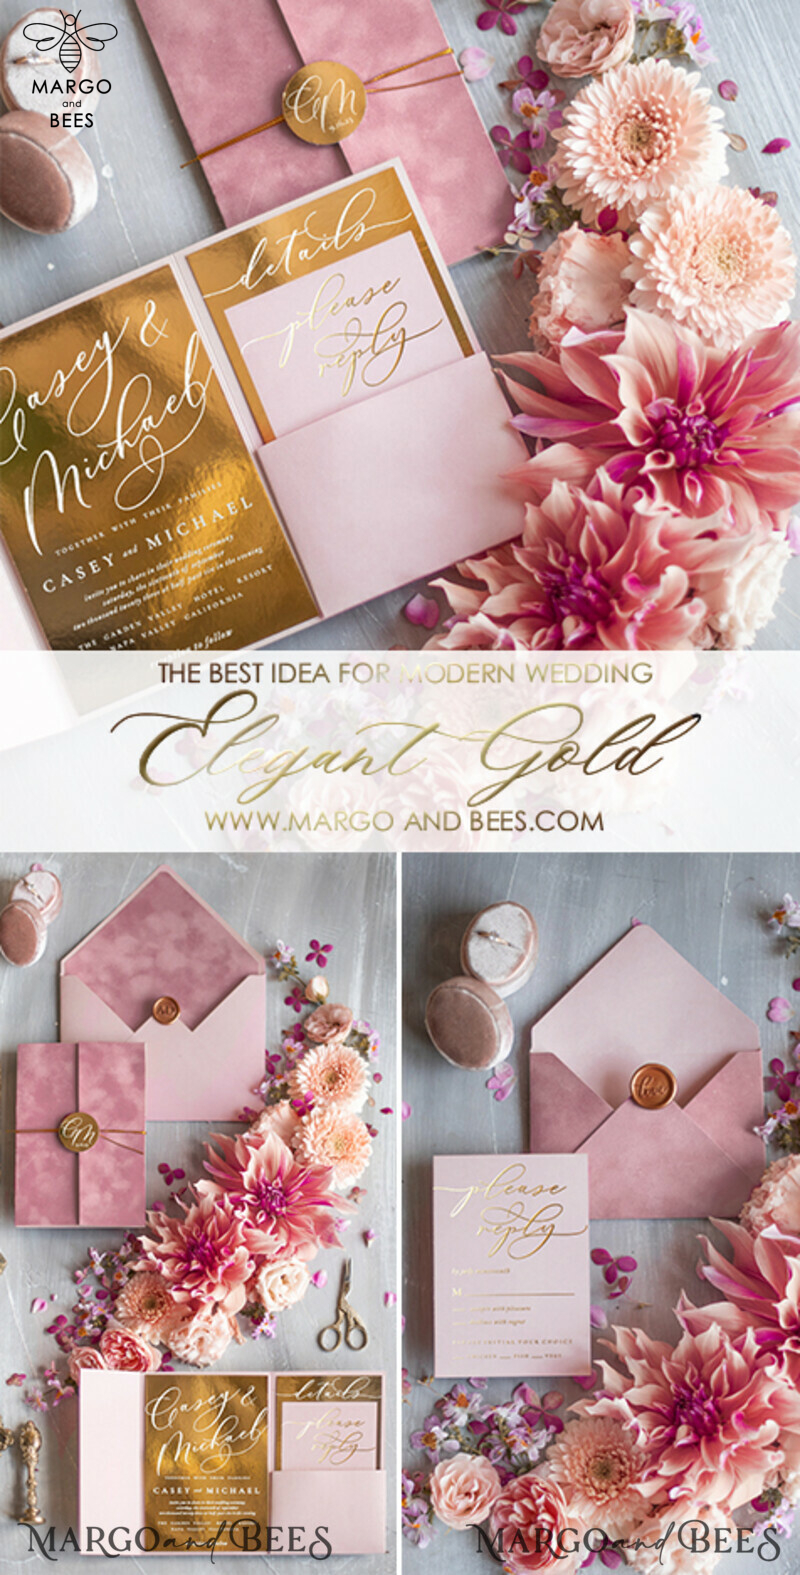 is blush pink and gold wedding invitations are good for summer wedding ?-8